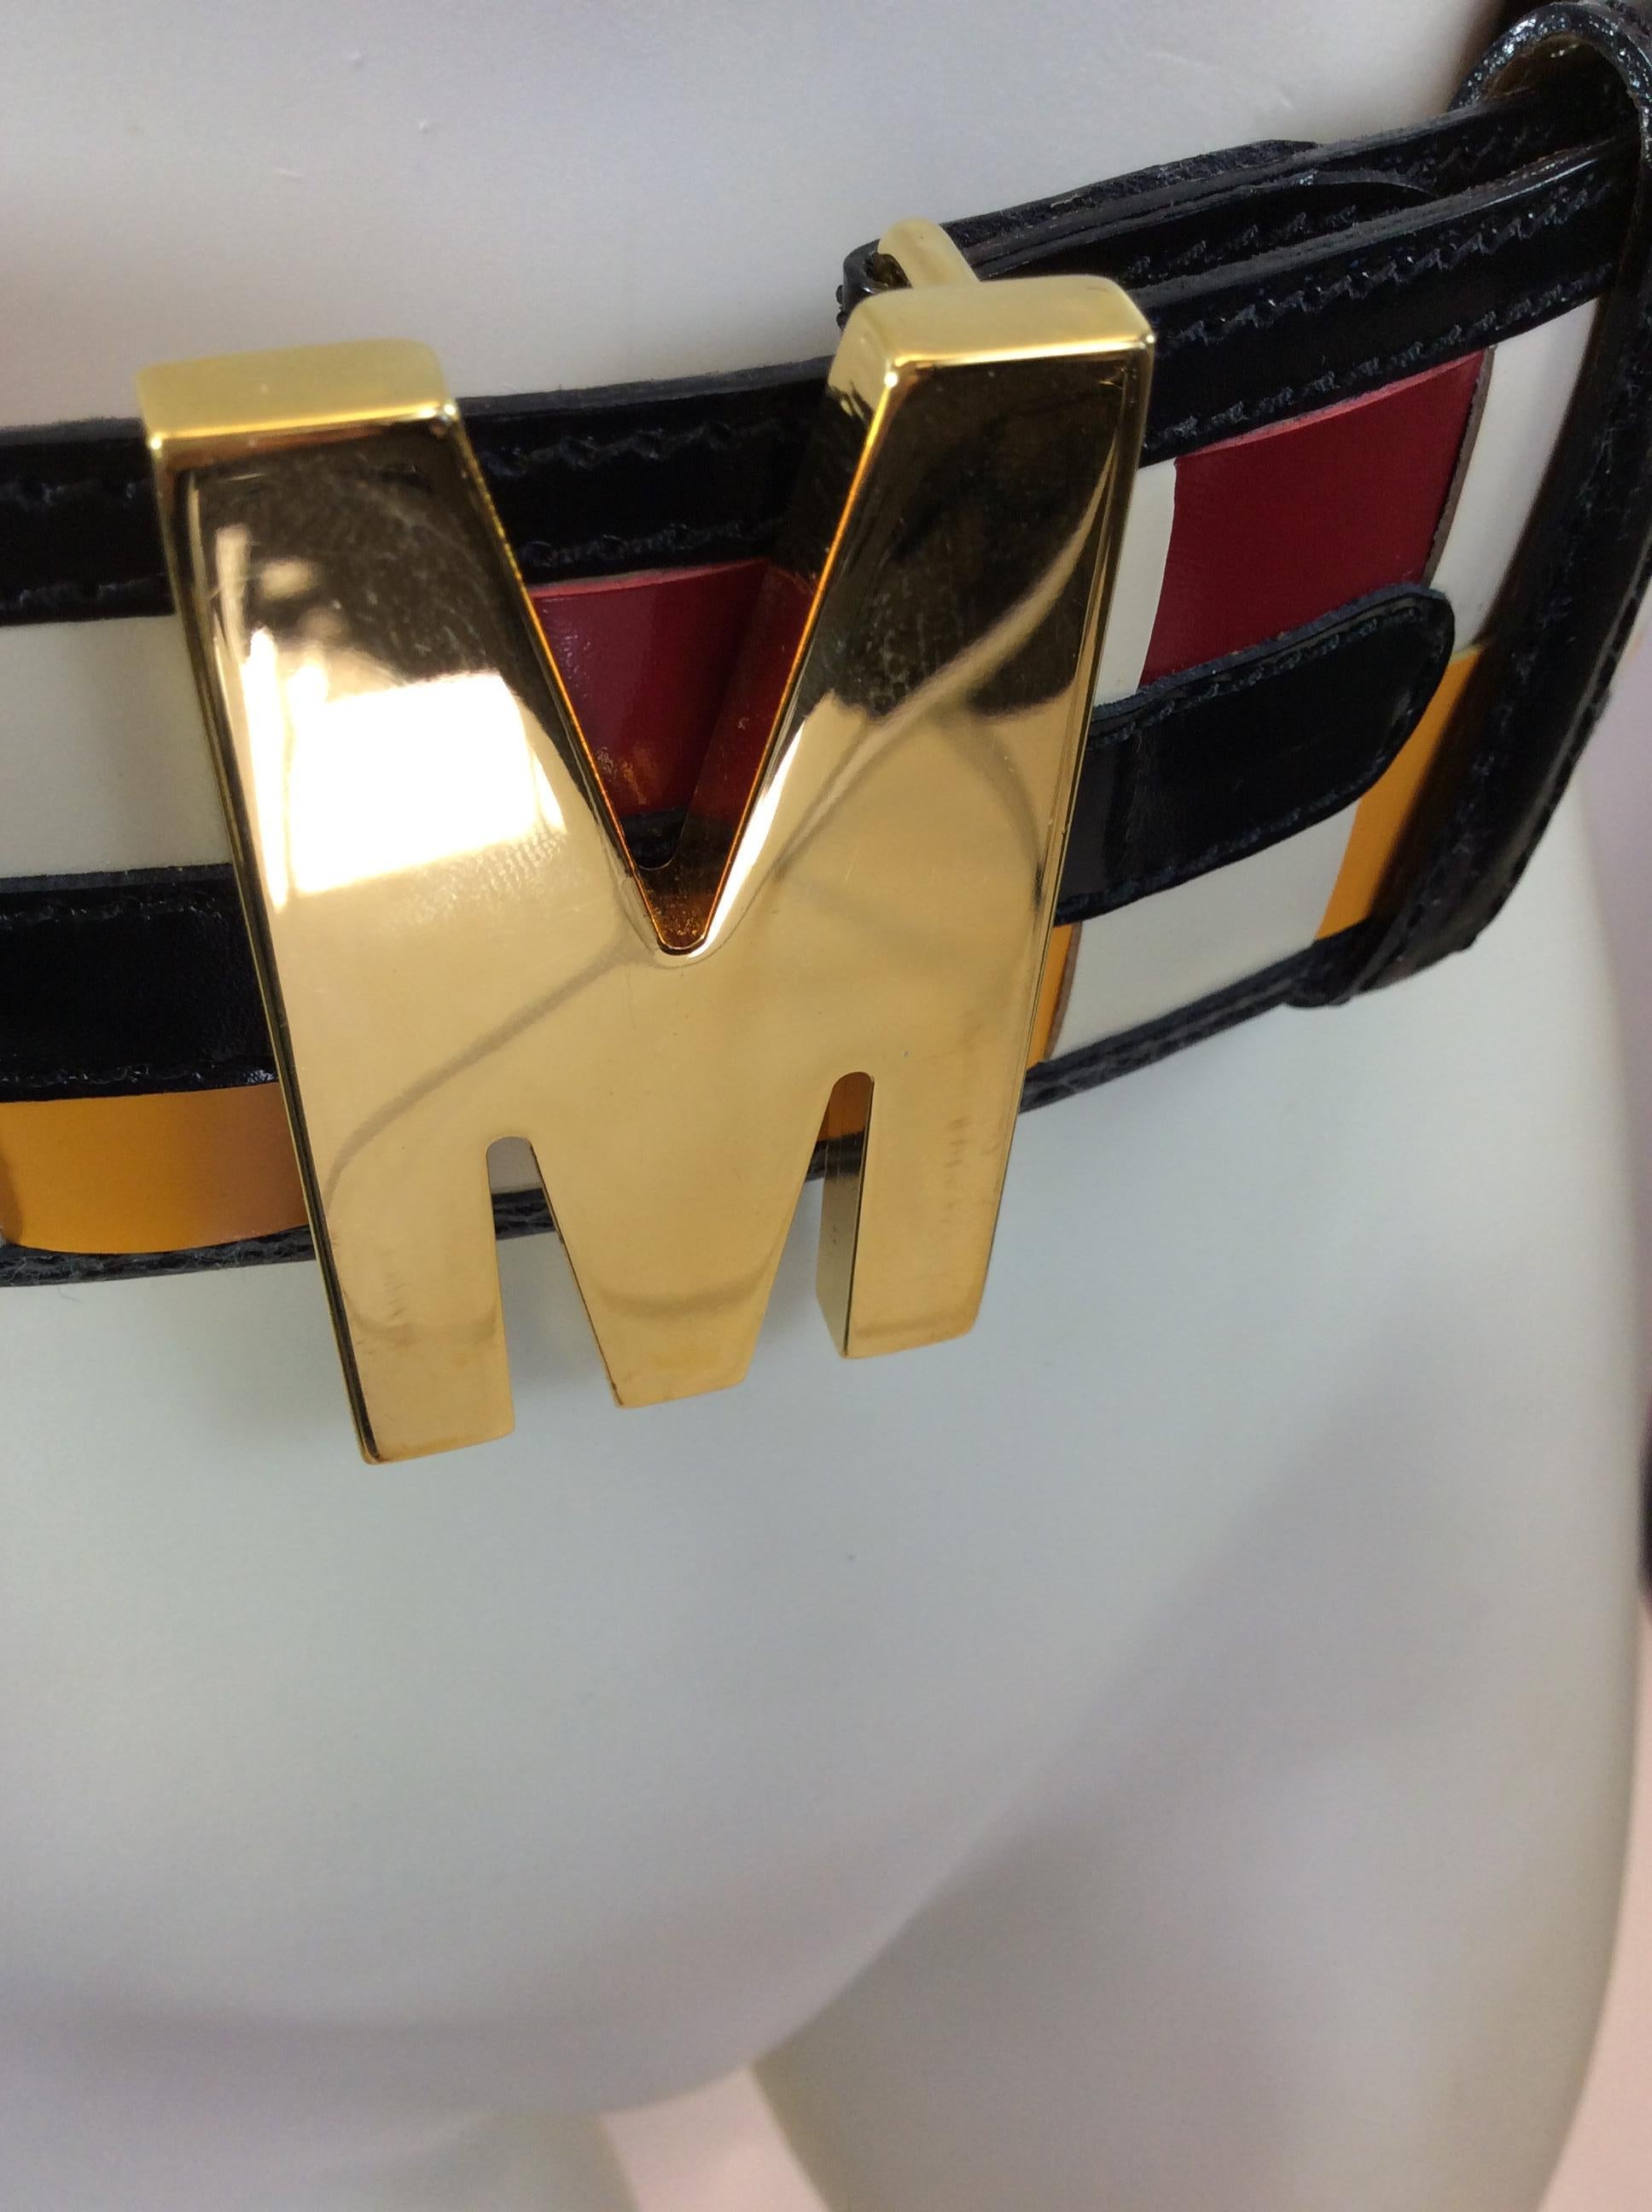 Moschino Red, Yellow, White, and Black Checkered Belt In Excellent Condition For Sale In Narberth, PA